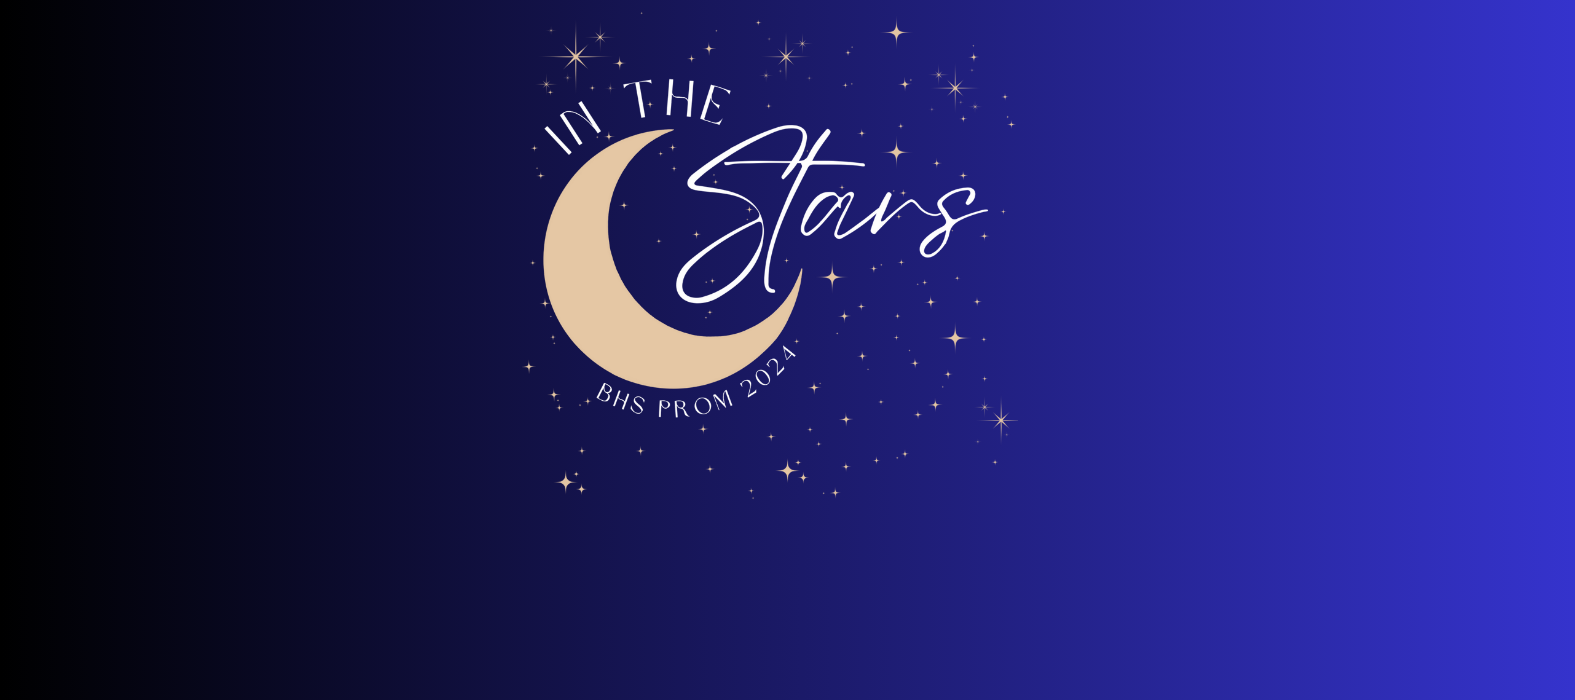 <p>In the Stars BHS Prom | April, 27, 2024</p>
<p>Q-Center | 6:30pm &#8211; 10:30pm</p>
<p>After Prom at Funway | 11:00pm &#8211; 2:00am</p>
<p><a href="https://bhs.bps101.net/bhsprom24/">ALL THE INFO | BUY TICKETS</a></p>
<p>&nbsp;</p>
